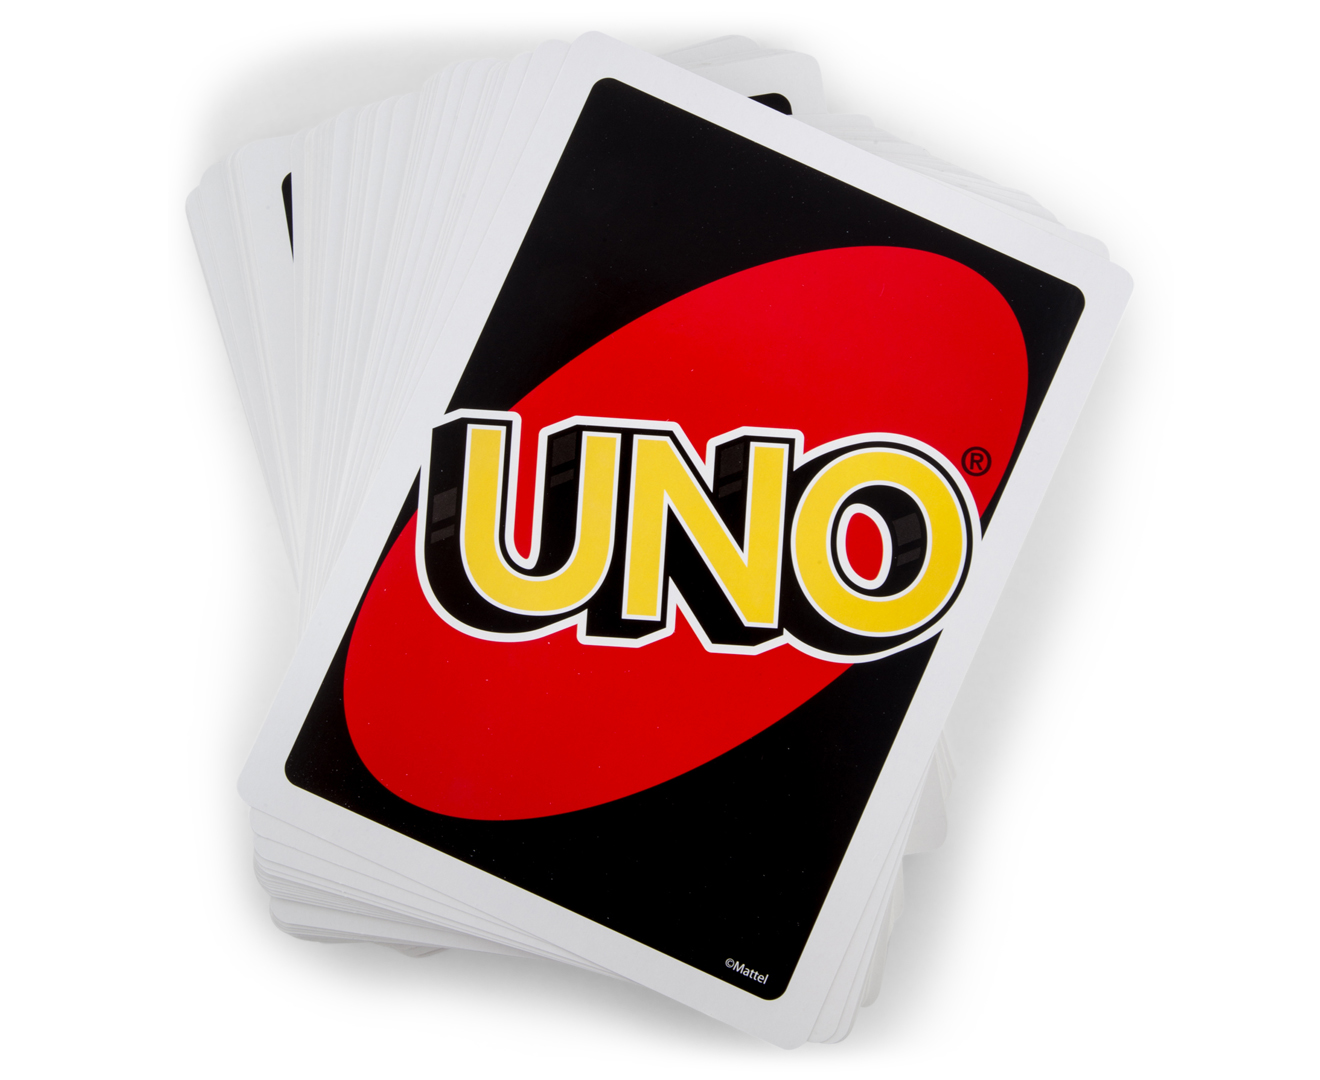 Uno Card Vector at Collection of Uno Card Vector free